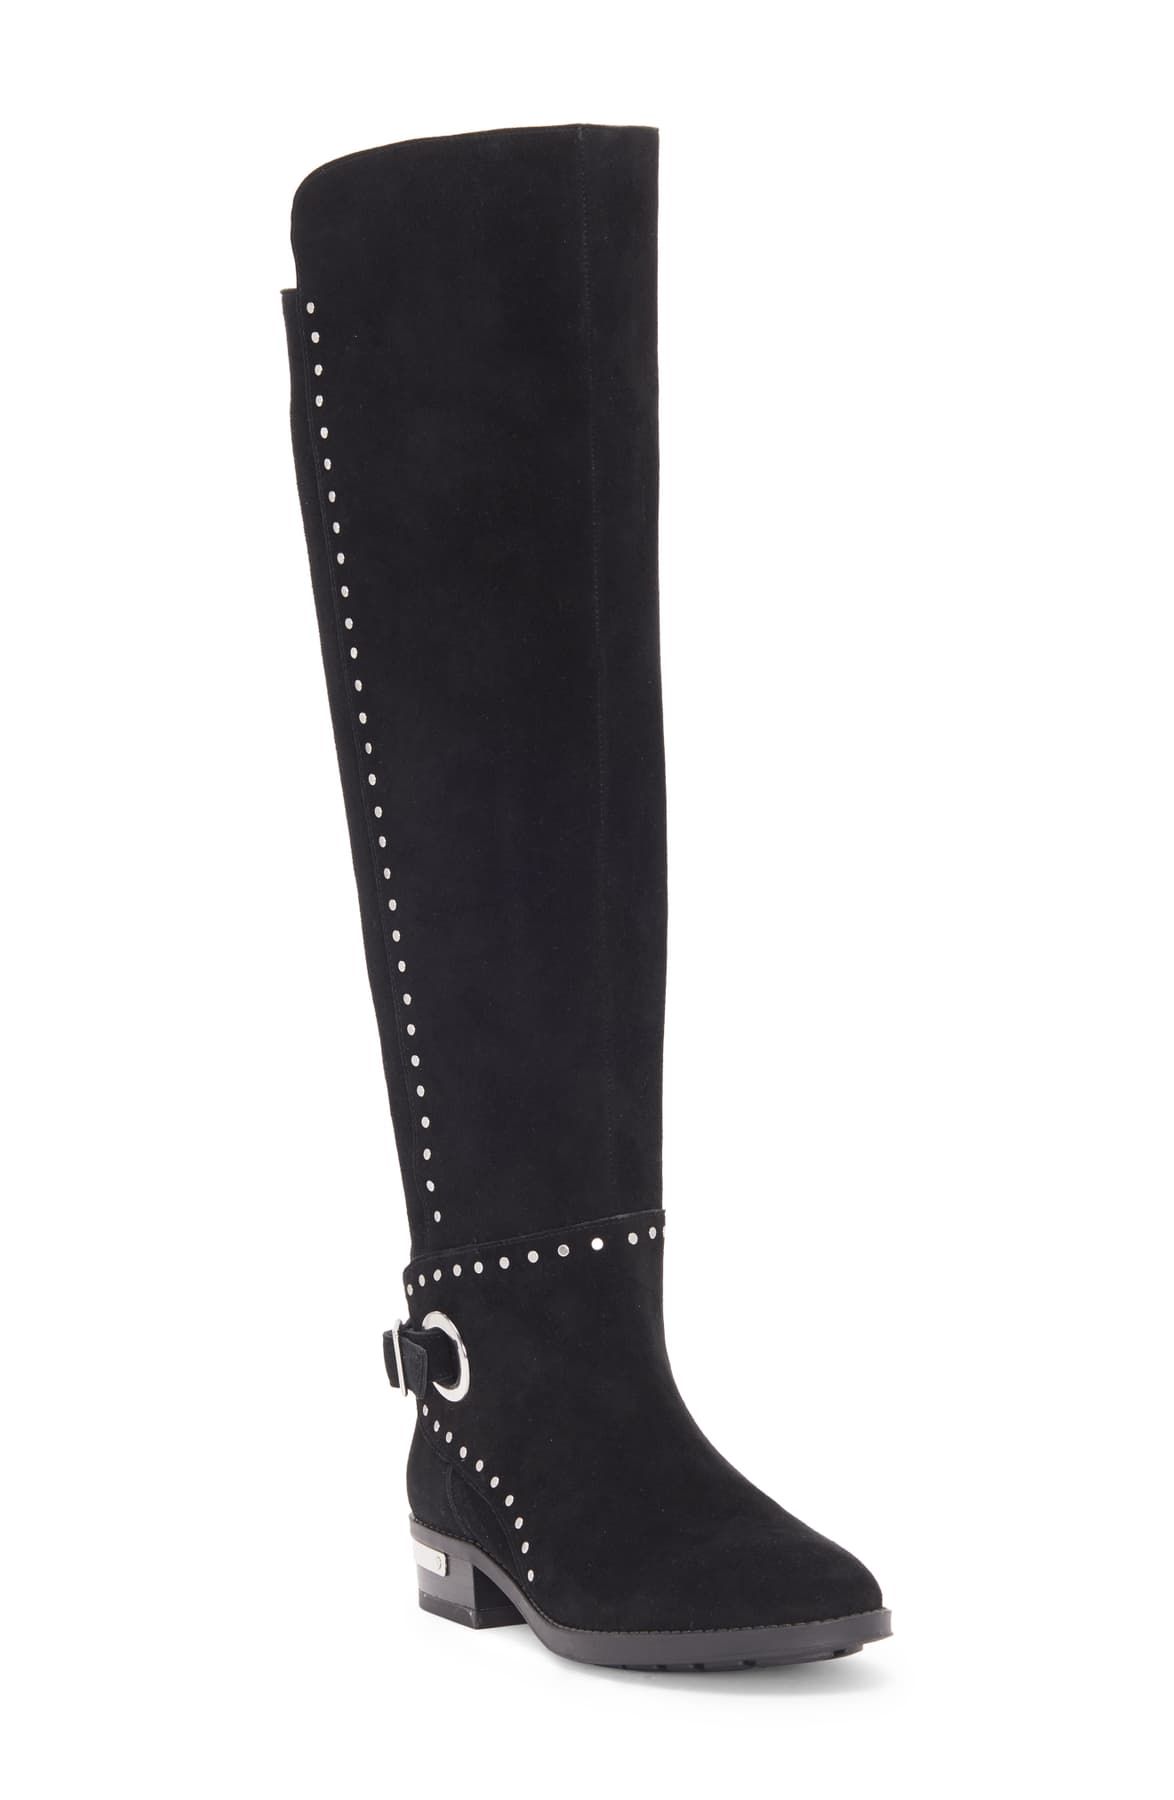 Poppidal Knee High Riding Boot Vince Camuto